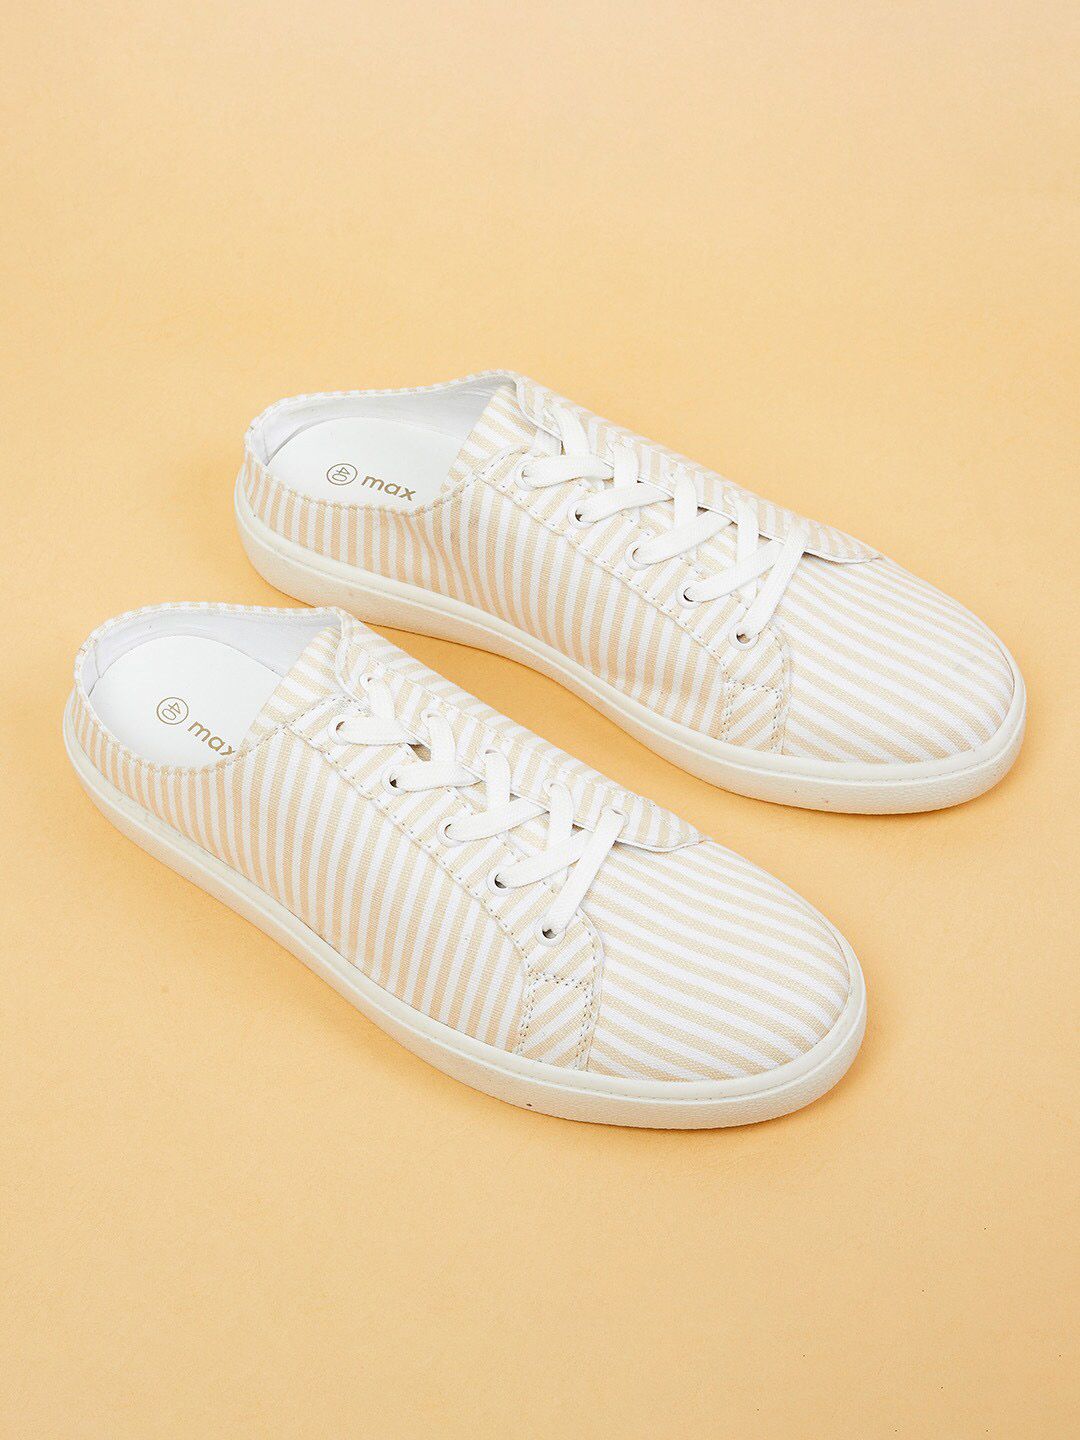 max Women Beige Striped Sneakers Price in India